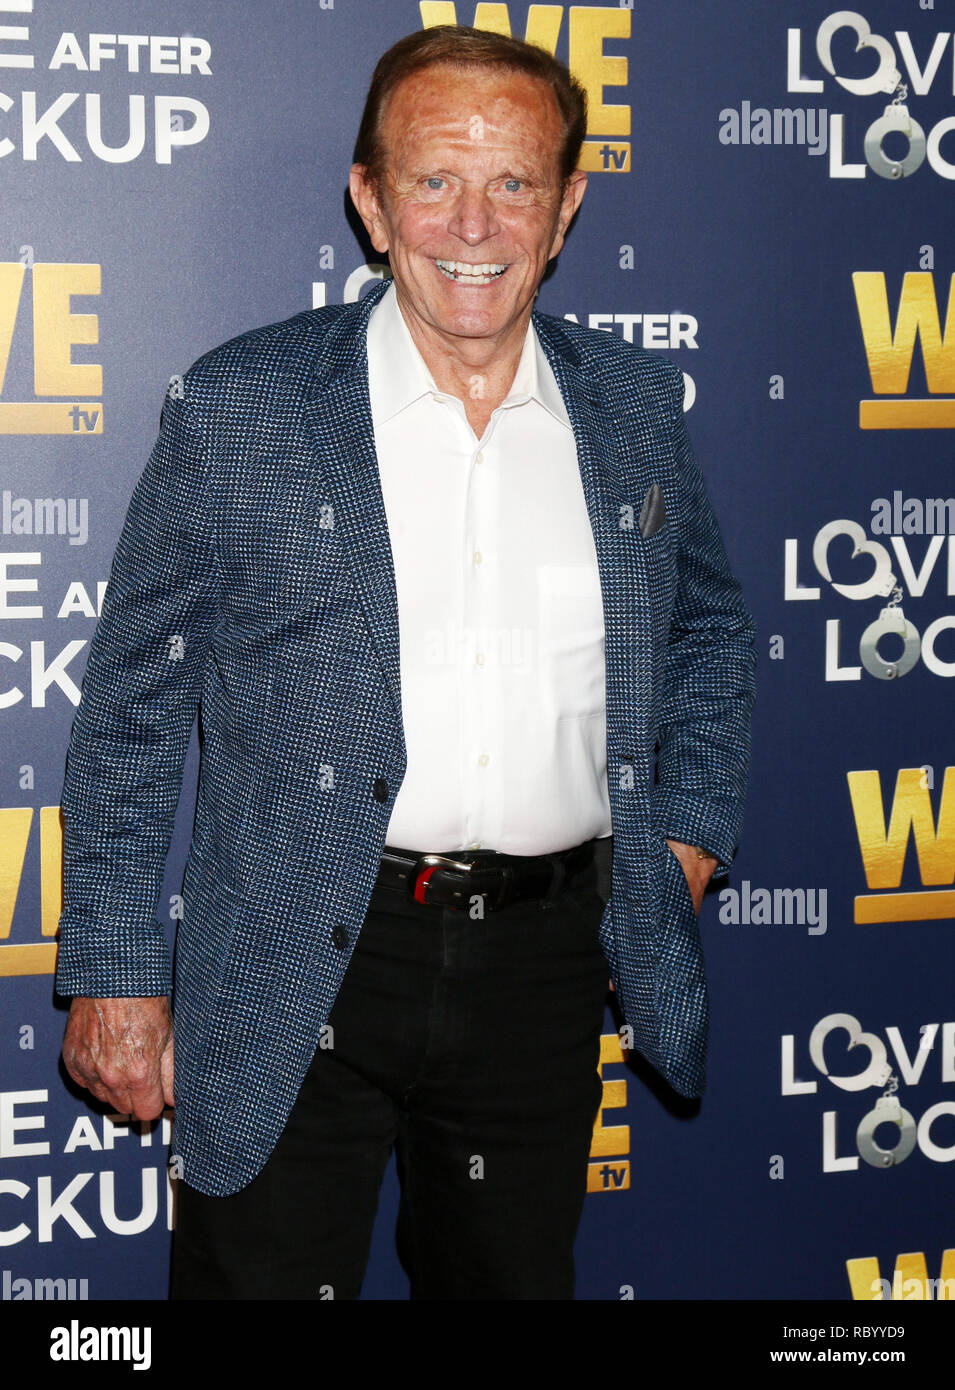 WE TV celebrates the return of 'Love After Lockup' with panel, 'Real Love: Relationship Reality TV's Past, Present & Future,' at The Paley Center for Media  Featuring: Bob Eubanks Where: Beverly Hills, California, United States When: 12 Dec 2018 Credit: Nicky Nelson/WENN.com Stock Photo